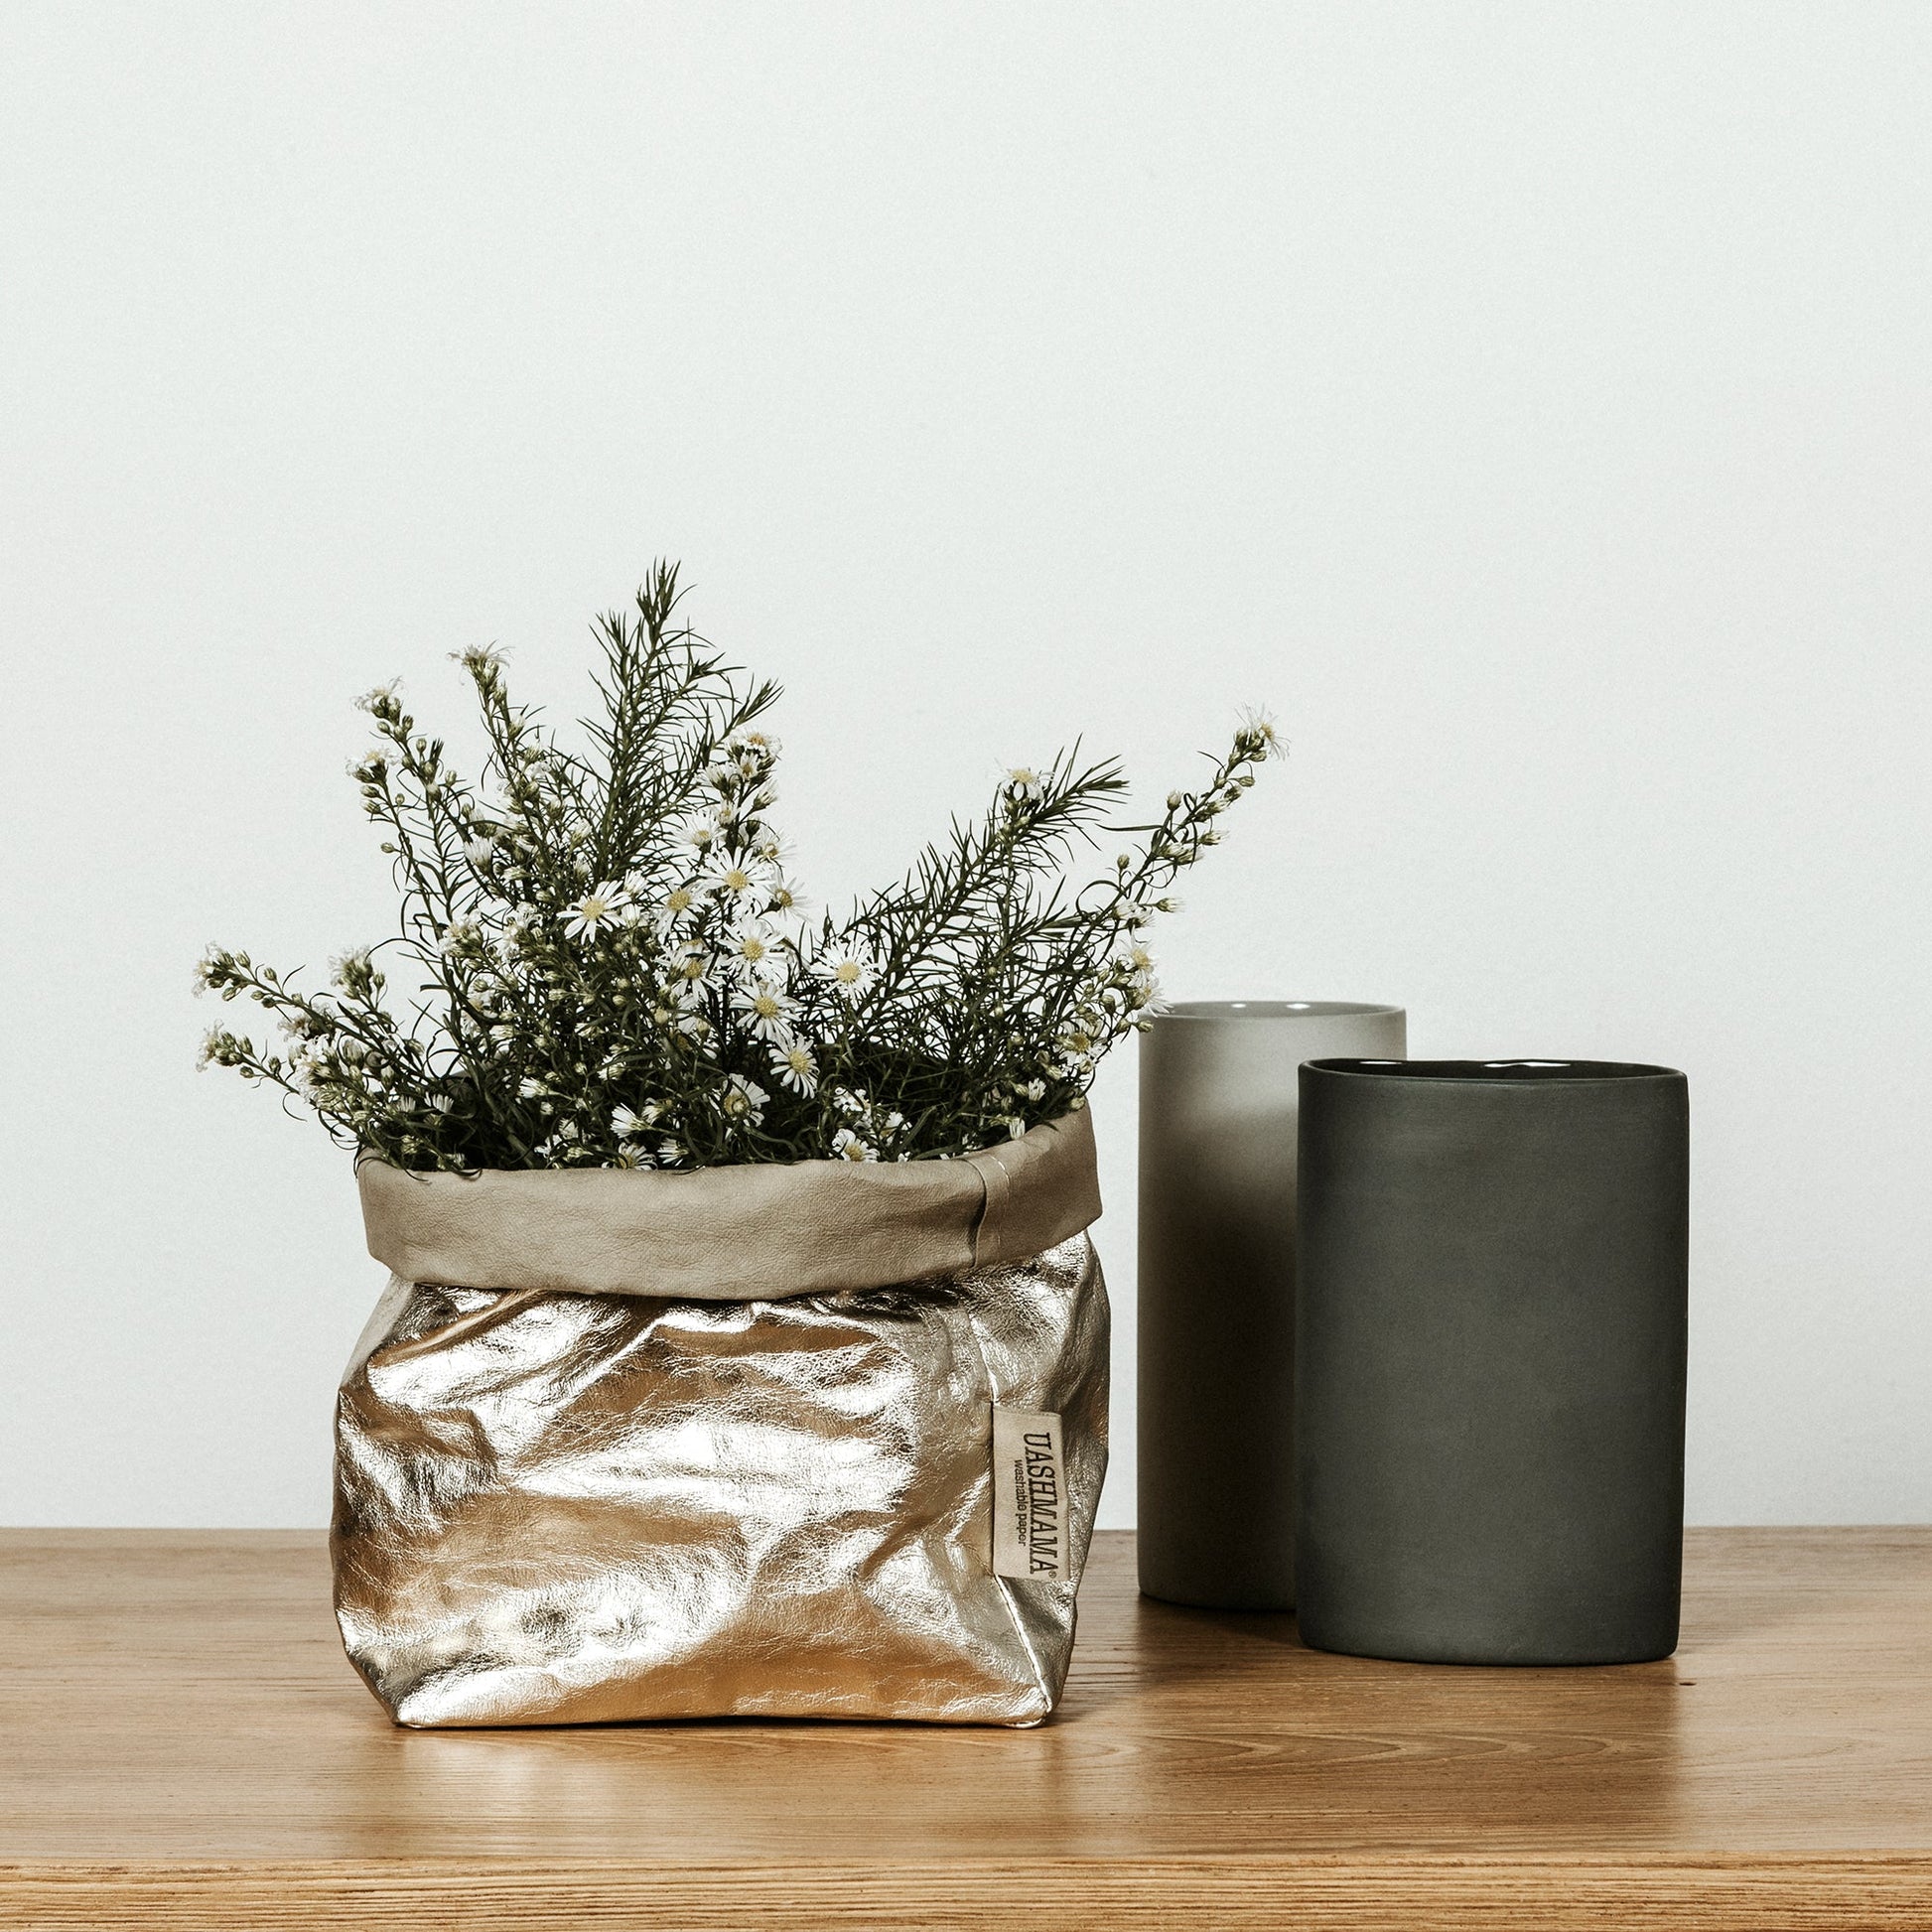 A washable paper bag is shown. The bag is rolled down at the top and features a UASHMAMA logo label on the bottom left corner. The bag pictured is the medium size in metallic platinum. The bag is filled with a flowering plant. Next to the bag are two pillar candles in grey and black.